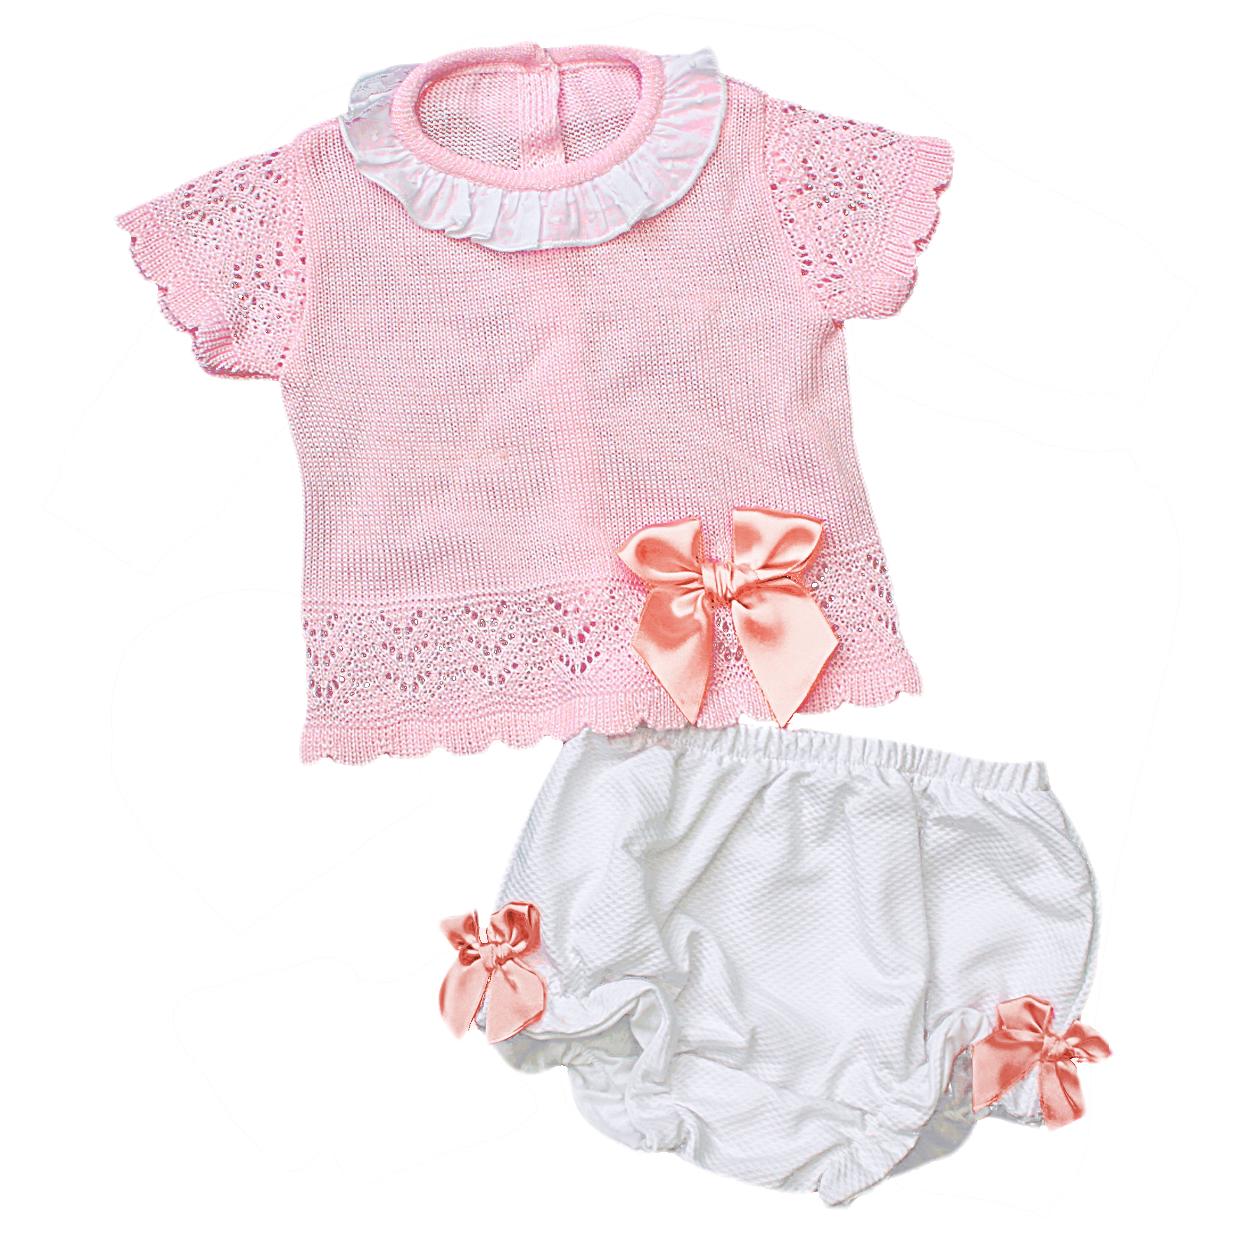 Baby Girls Pink Short Sleeve Top and Jam Pants Set with satin bows 